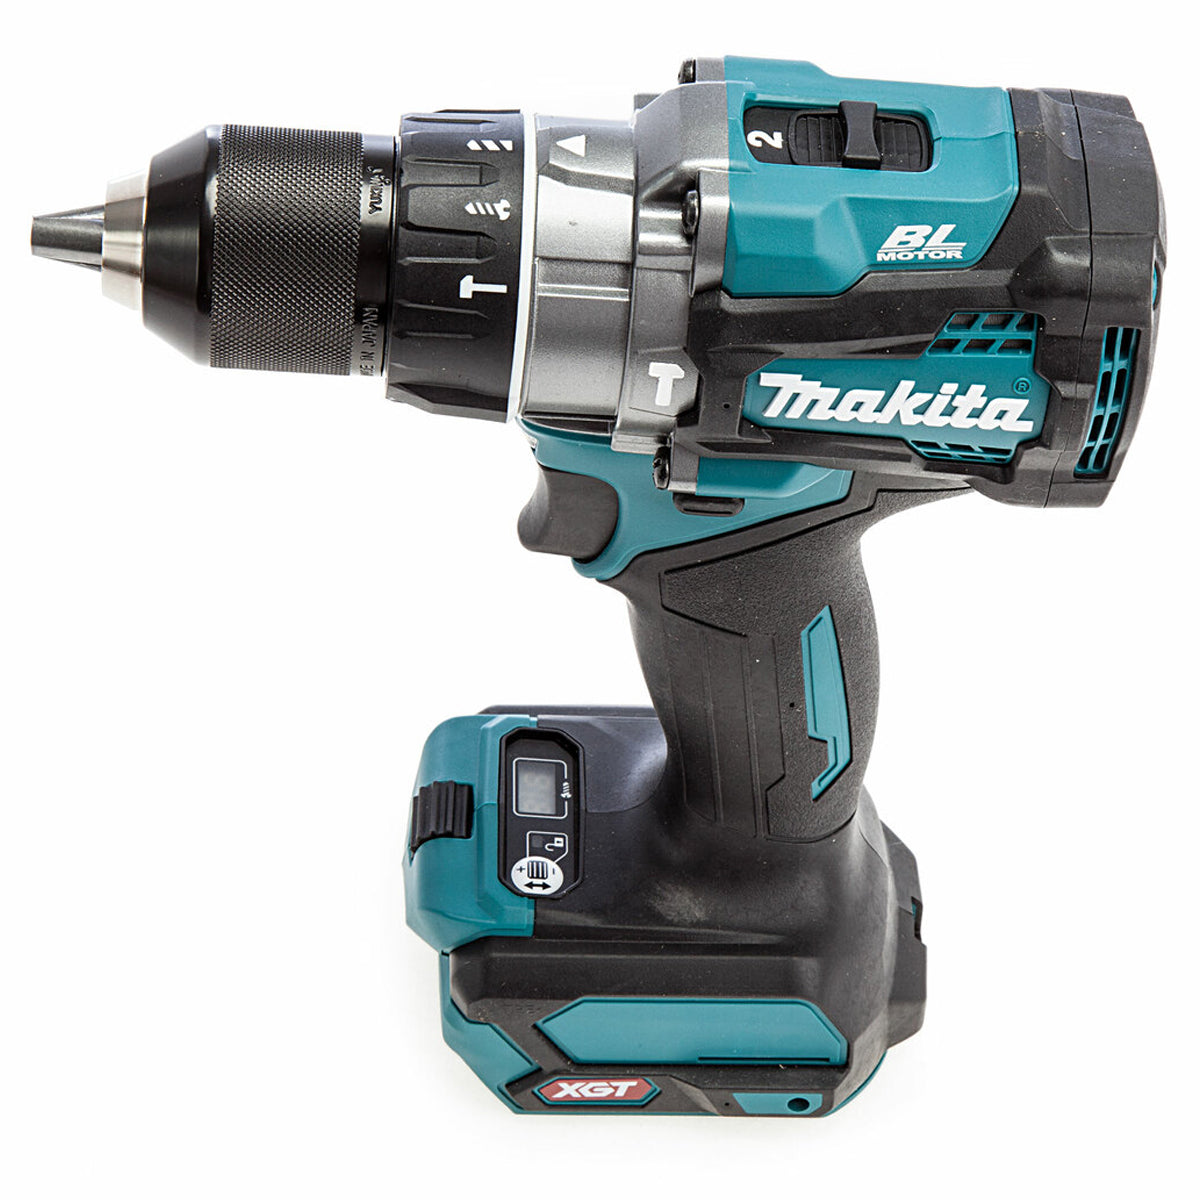 Makita HP001GZ 40V Brushless Combi Drill with 1 x 2.5Ah Battery & Charger